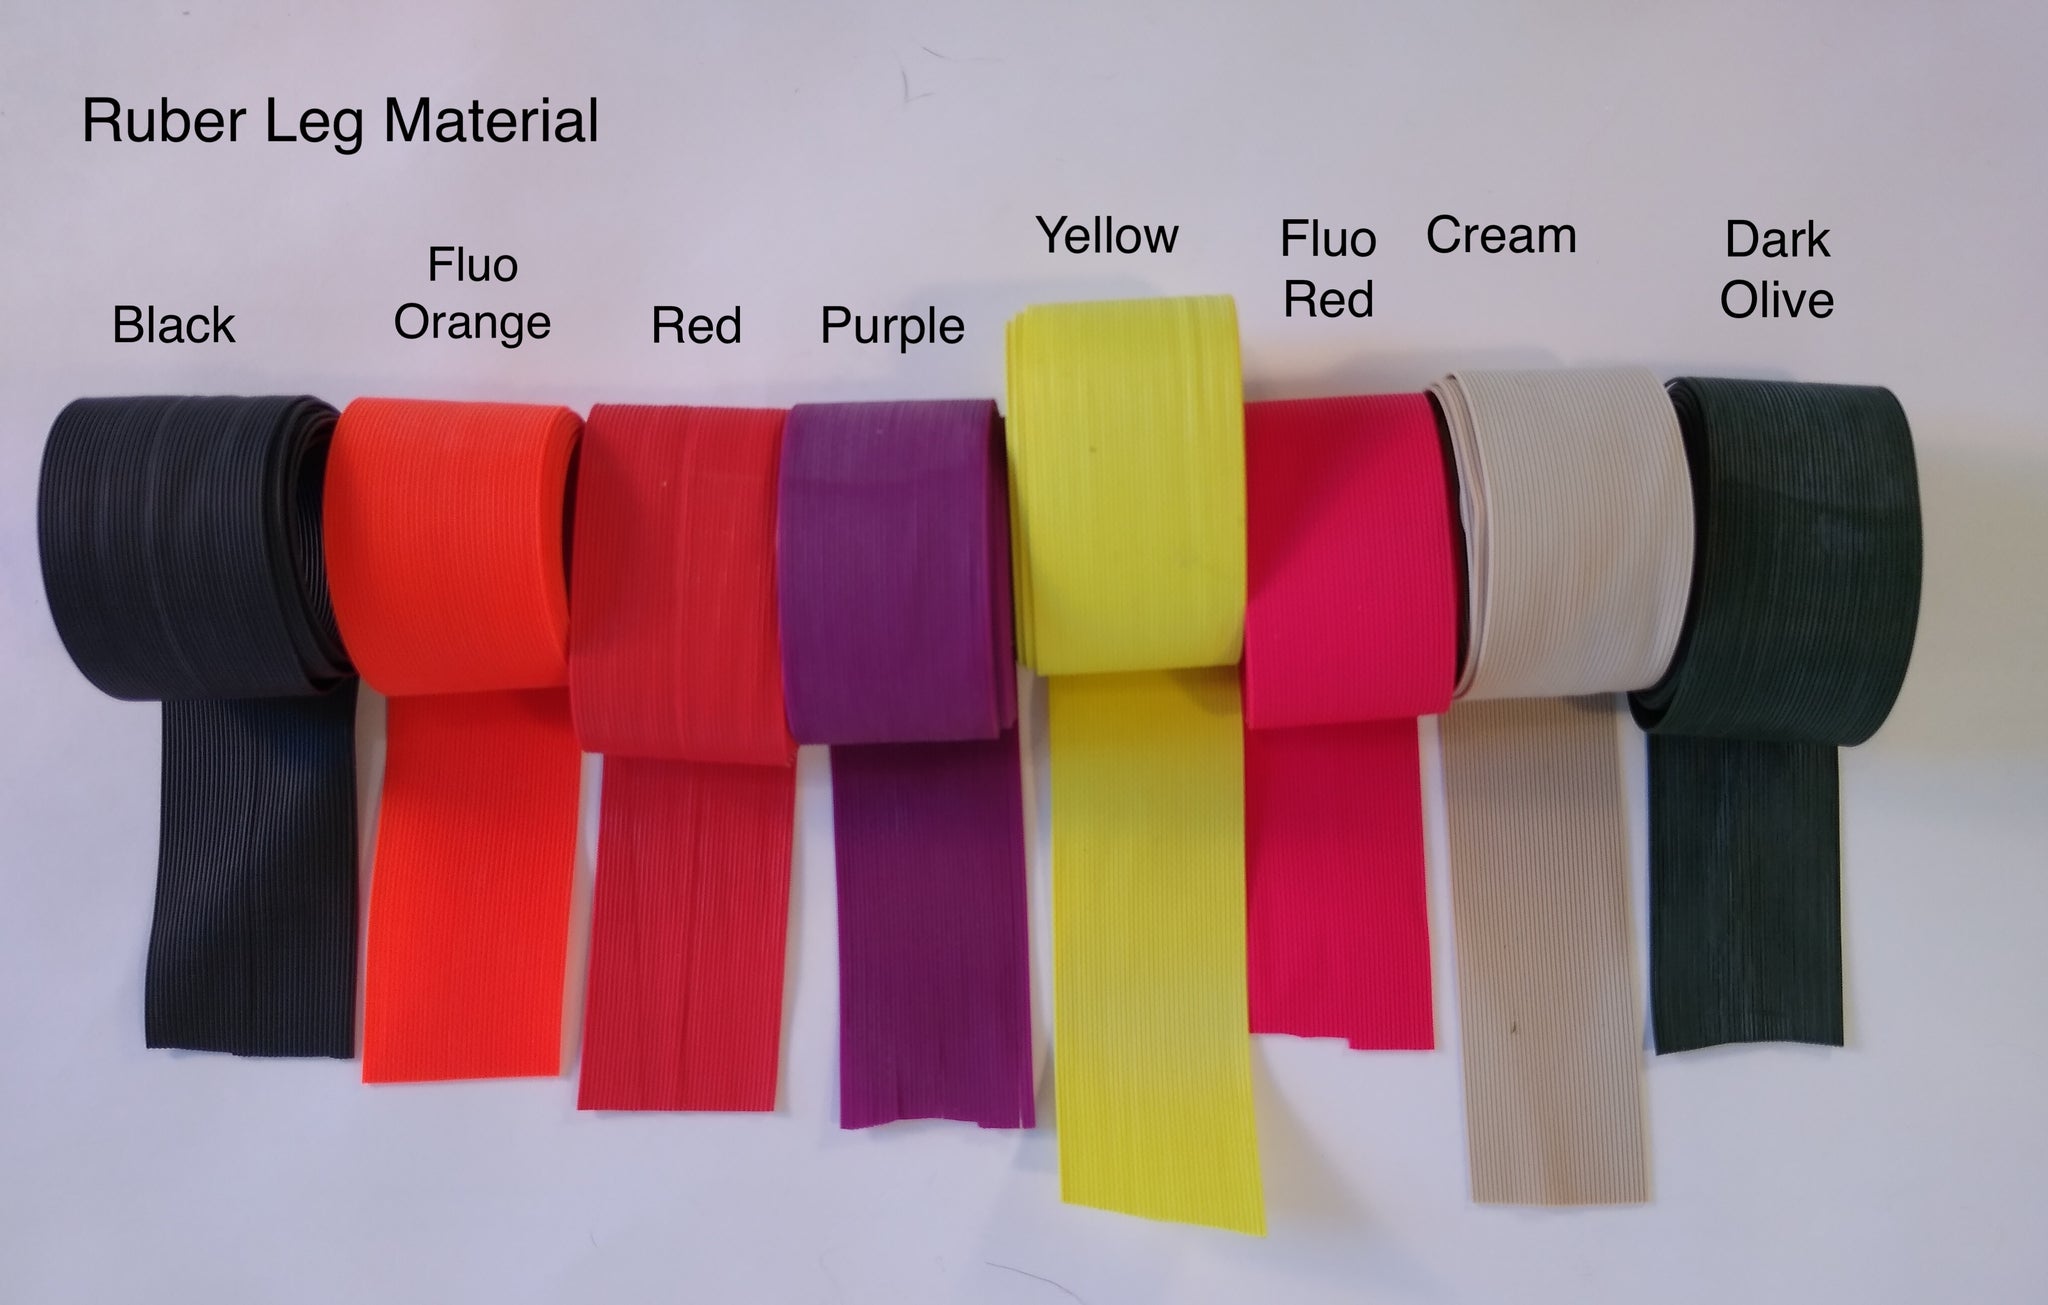 8 Colors Round Rubber Legs